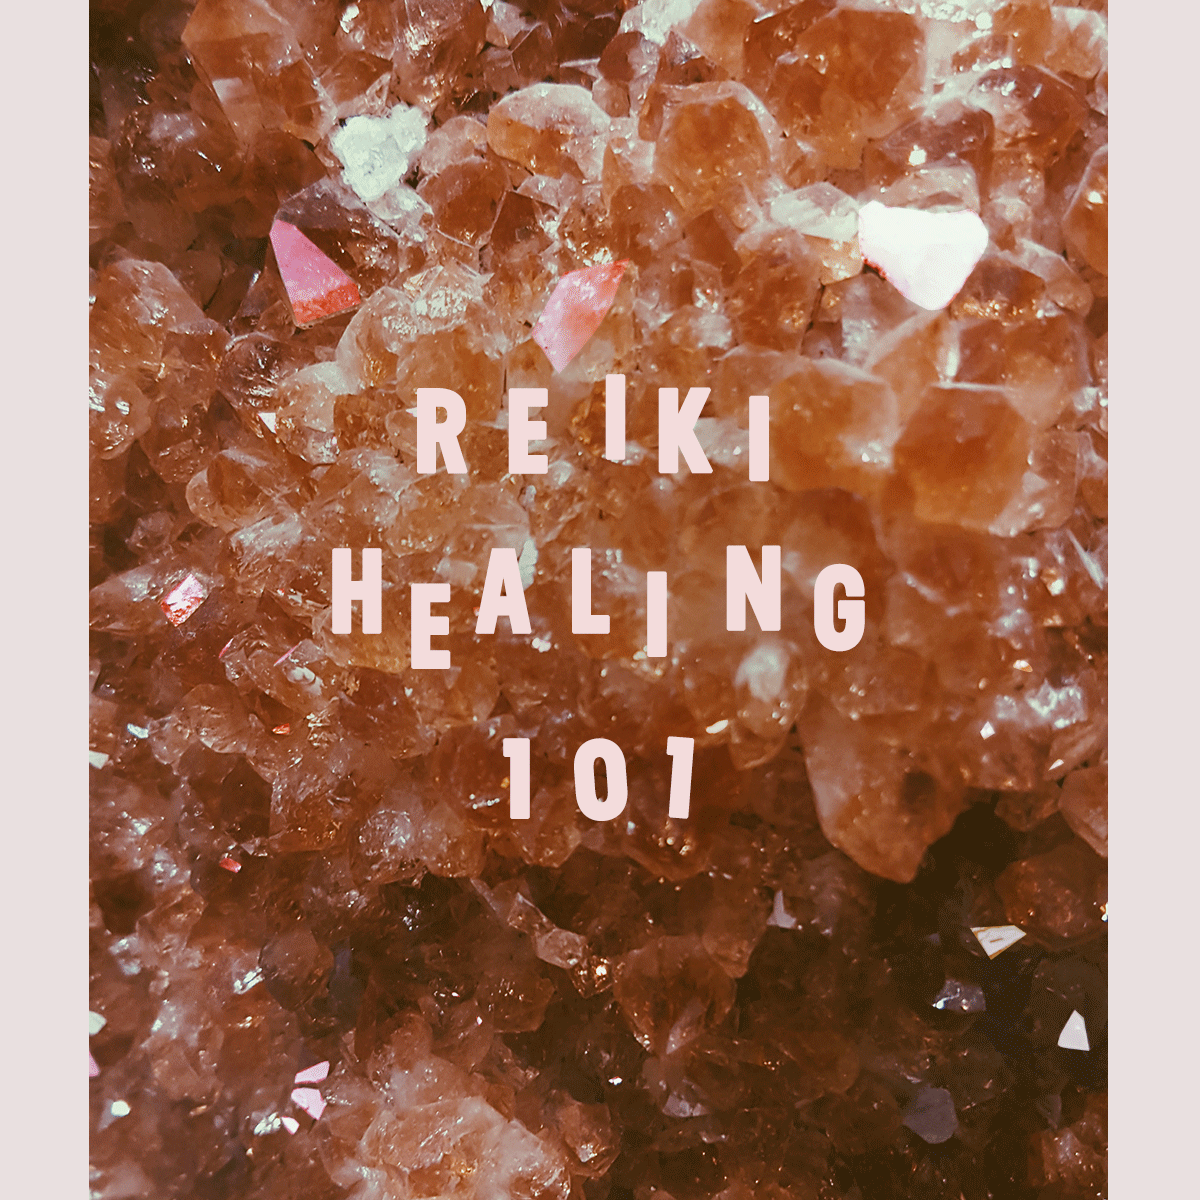 how-does-reiki-work-259833-1528384422695-square